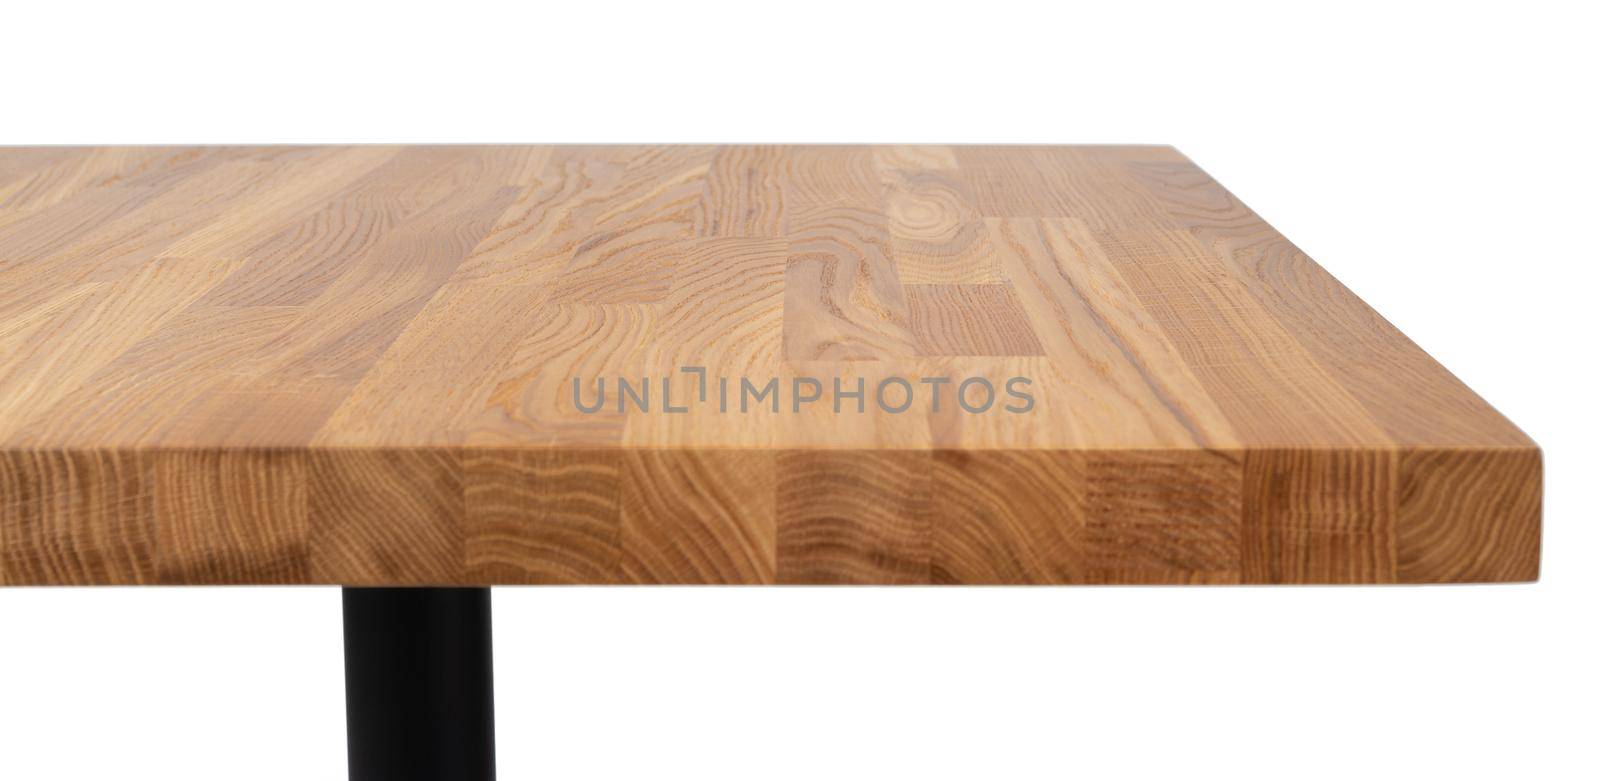 Wooden table with rectangle tabletop isolated on white background